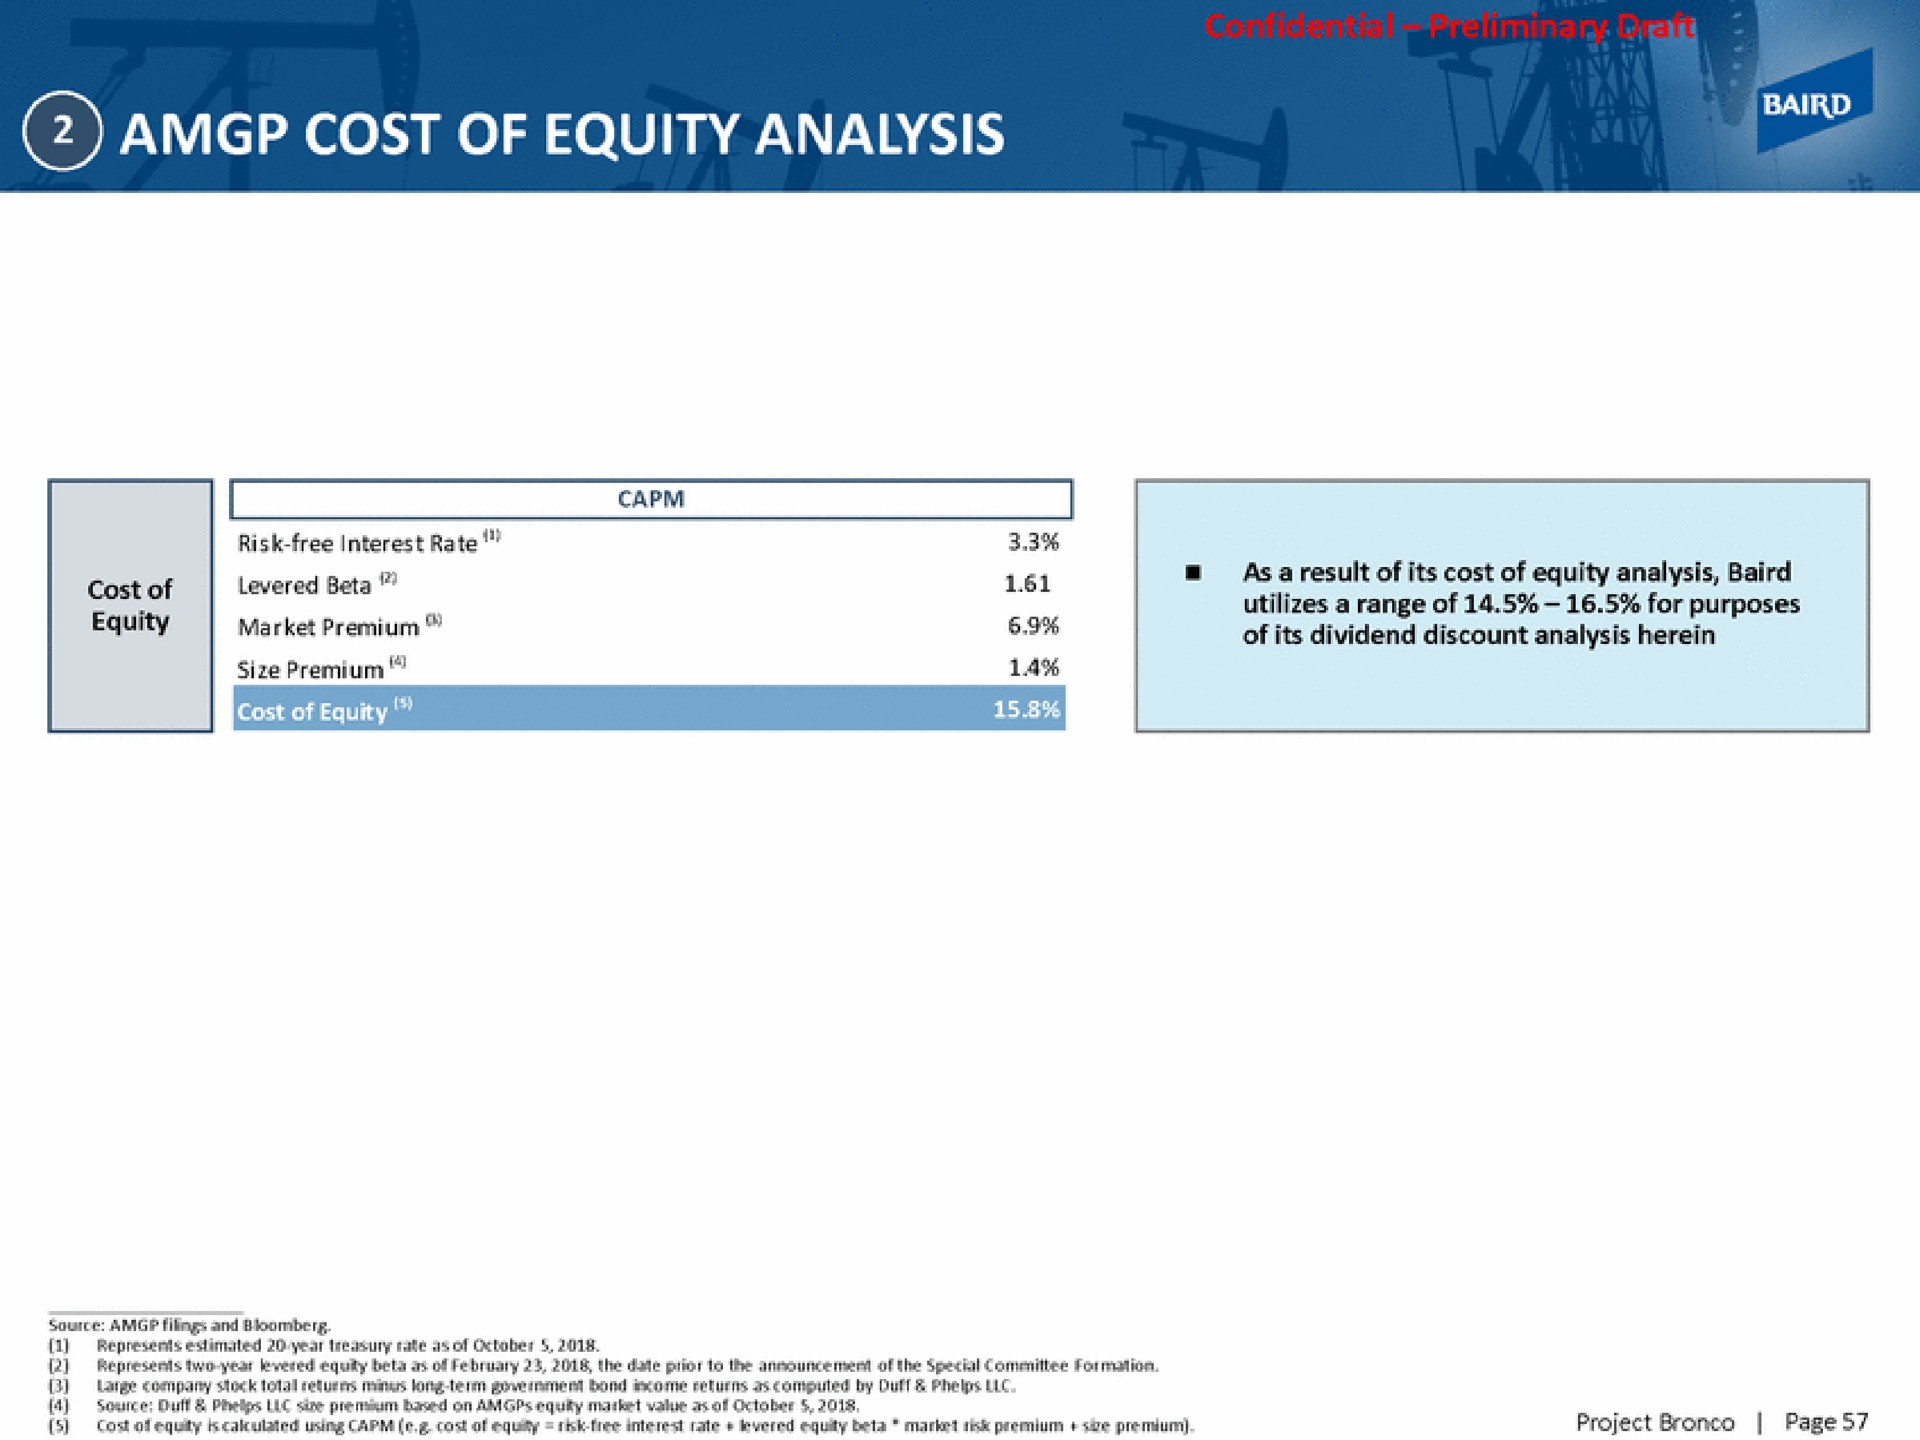 cost of equity analysis | Baird